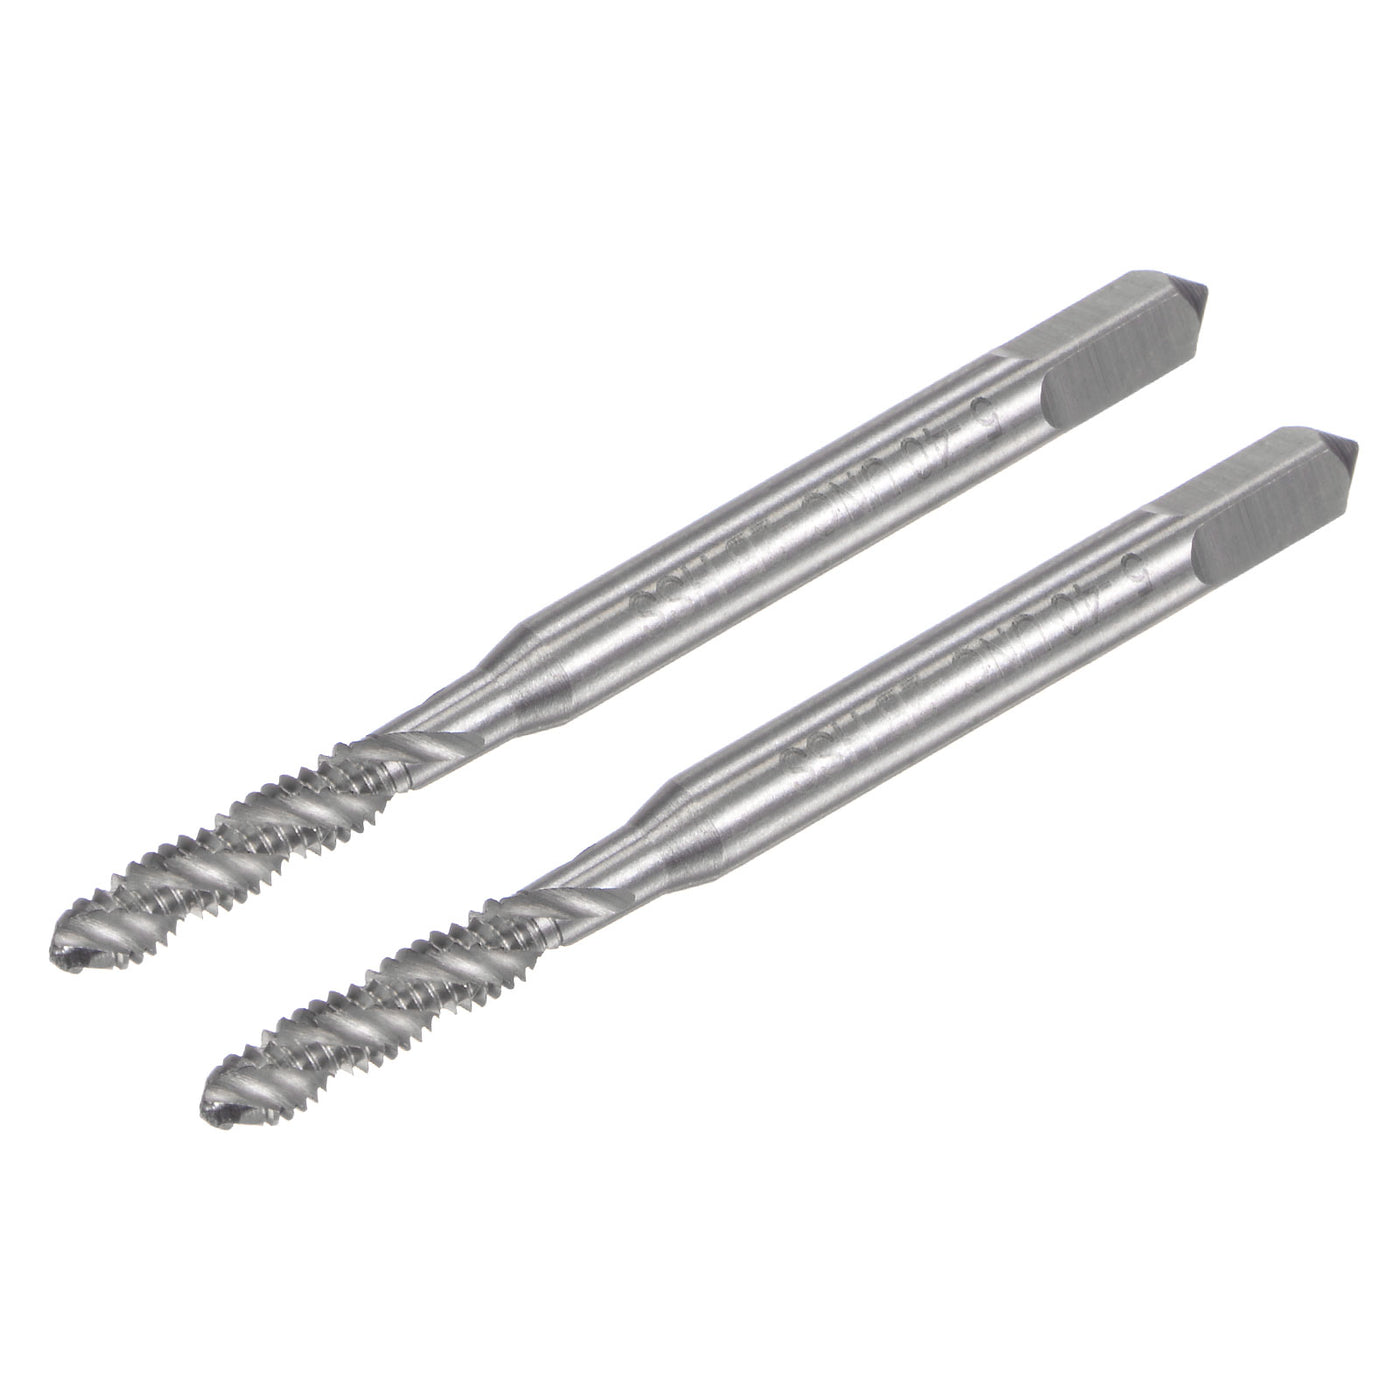 uxcell Uxcell 5-40 UNC 2B High Speed Steel Uncoated Machine Spiral Flutes Threading Tap 2pcs